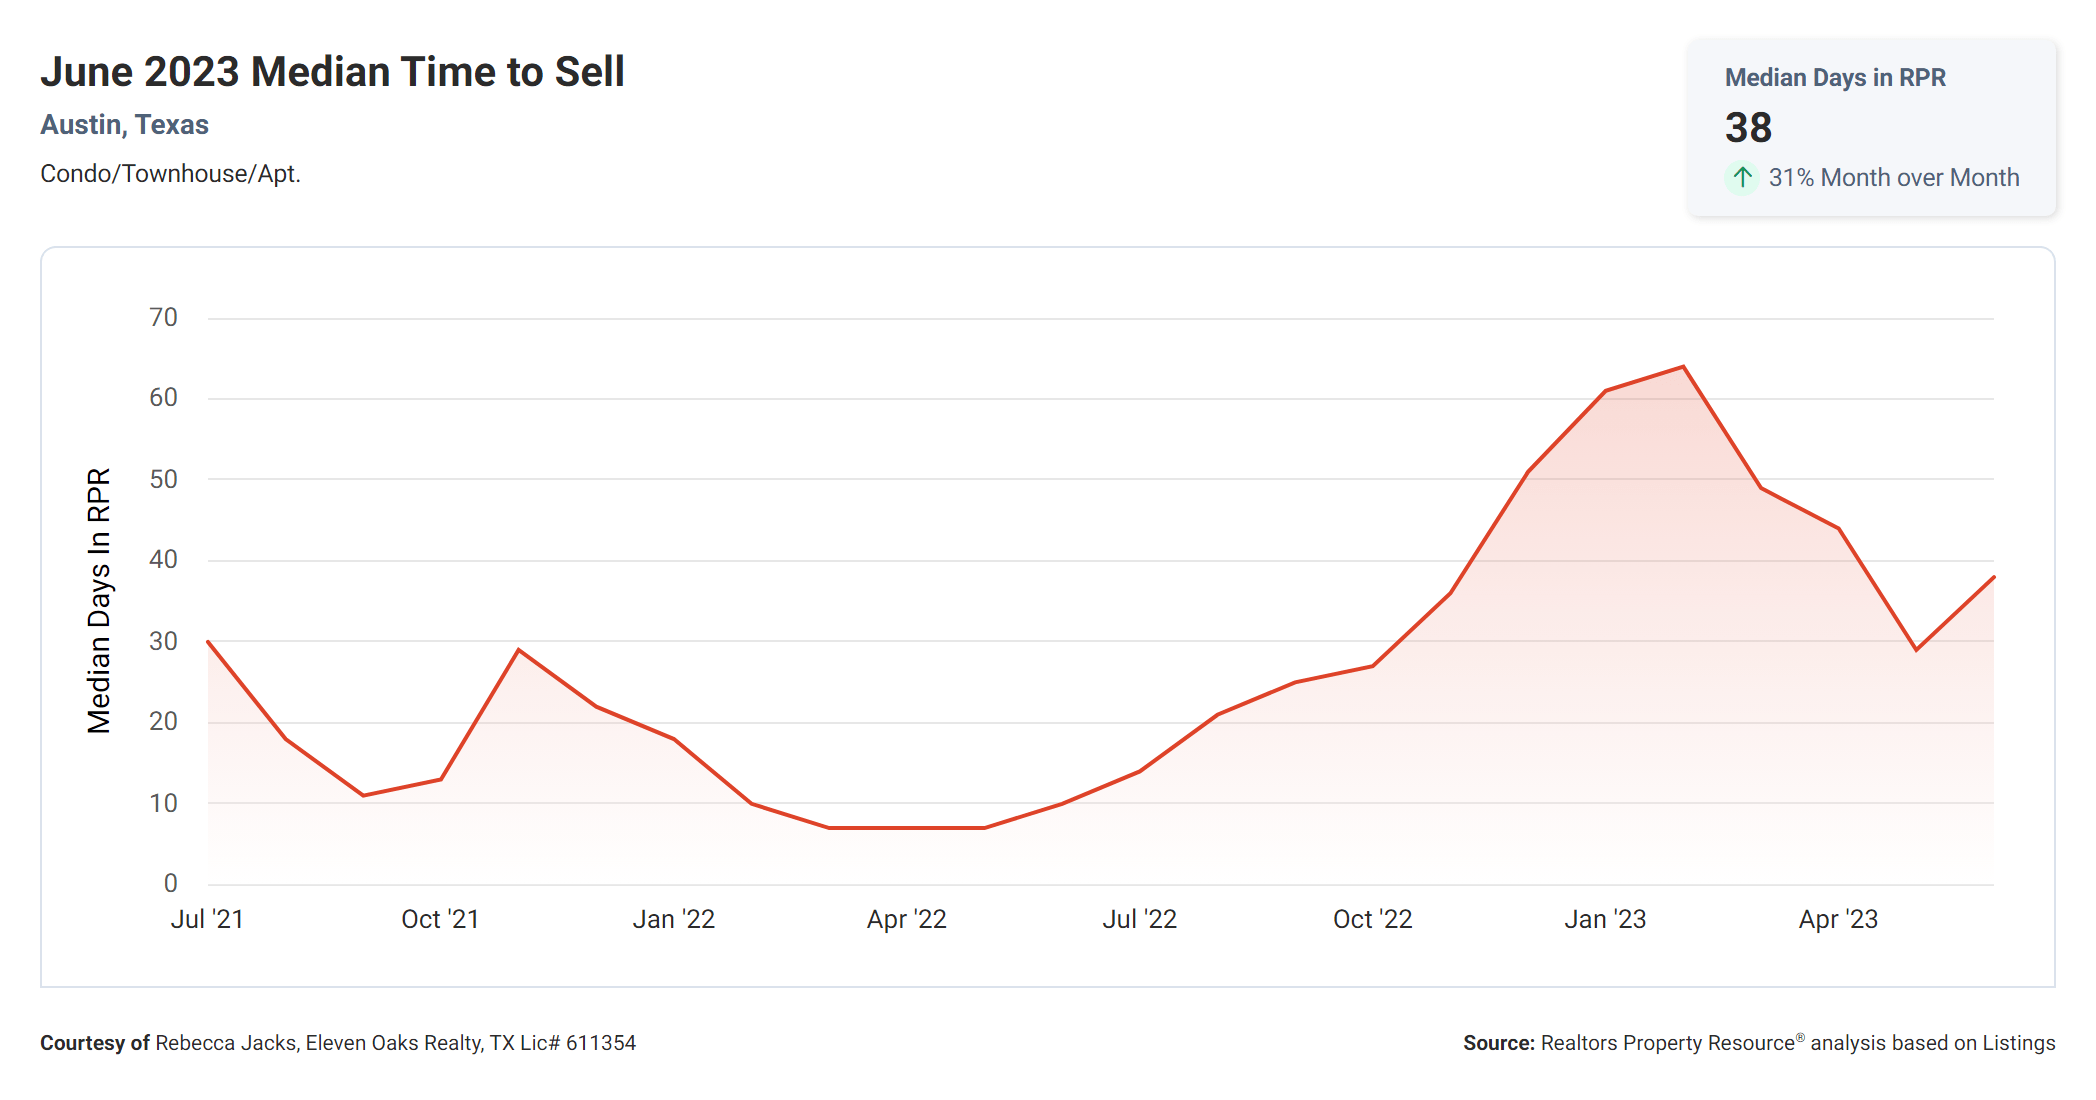 June 2023 median time to sell Austin condo